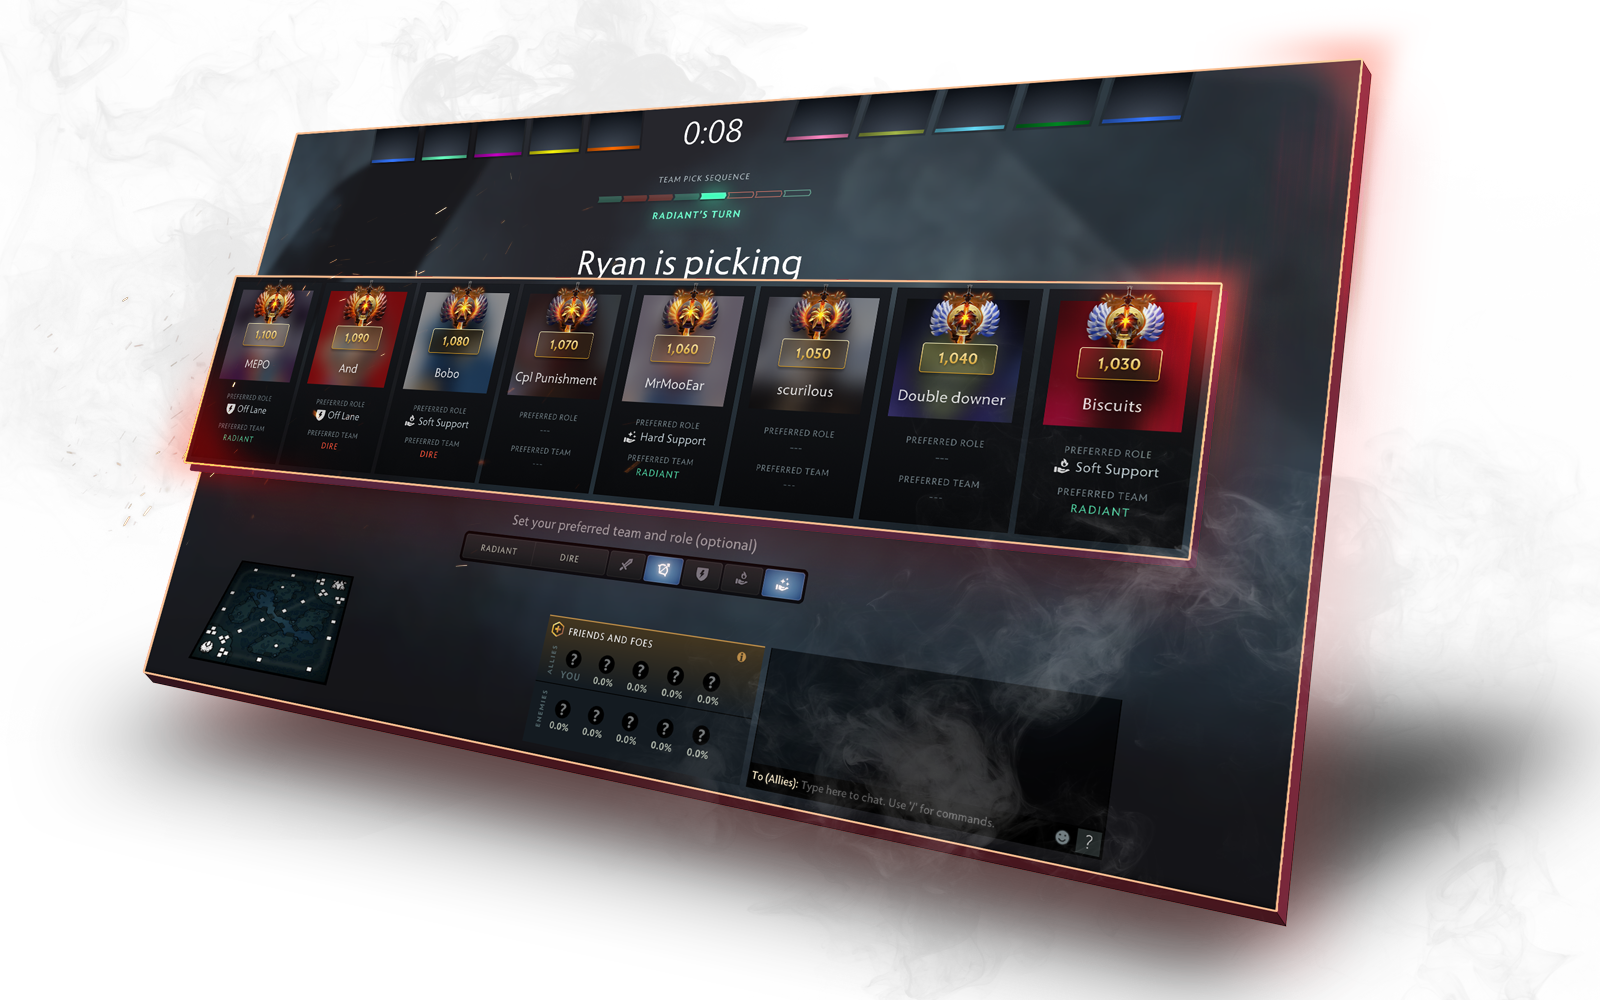 Dota 2 News : Dota 2 gets a major boost in average and peak players after  the release of Dragon's Blood Season 2